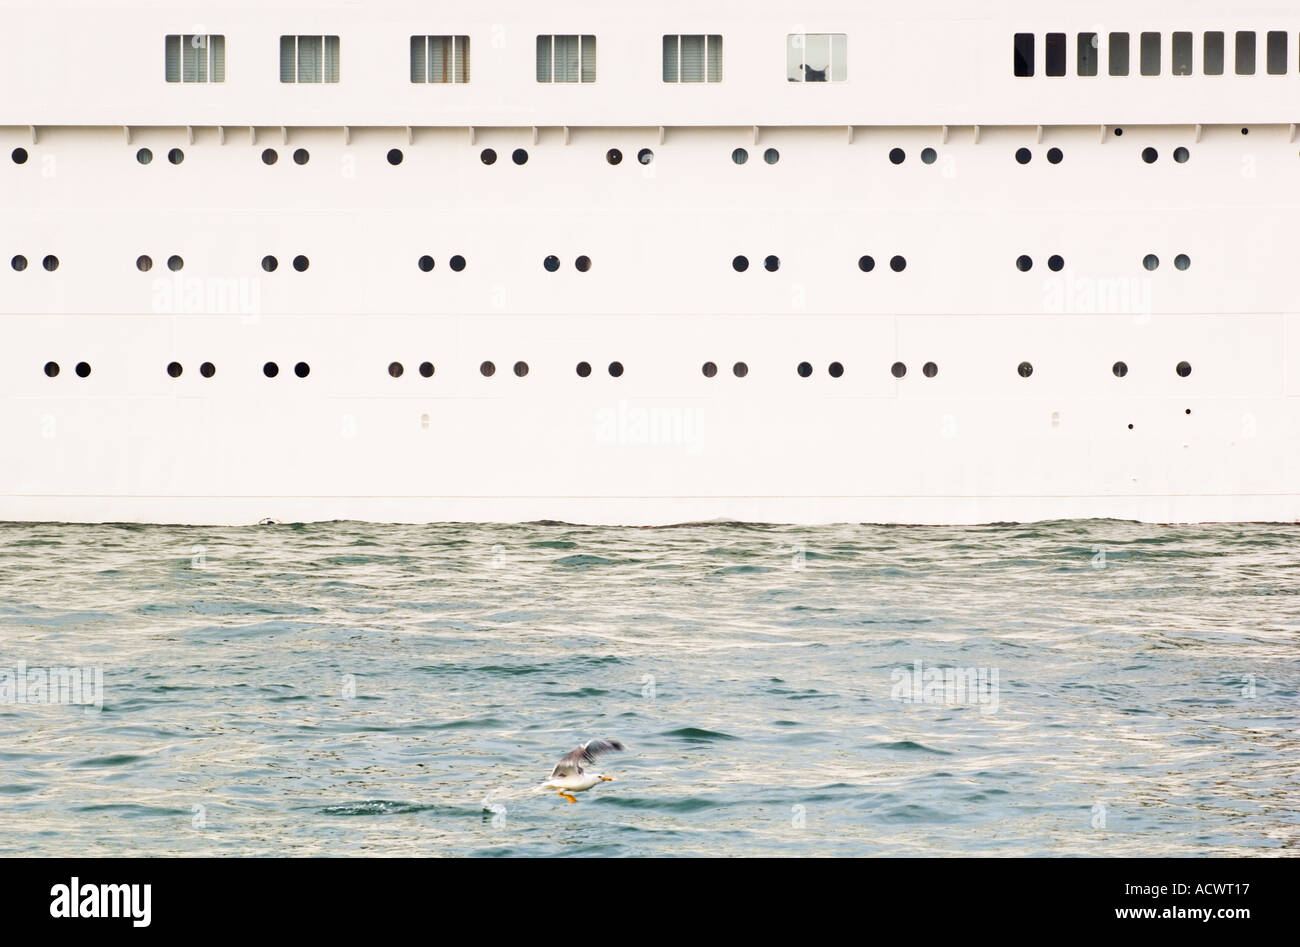 Color horizontal image of the side of a large cruise ship on water with a sea gull flying in the foreground Stock Photo